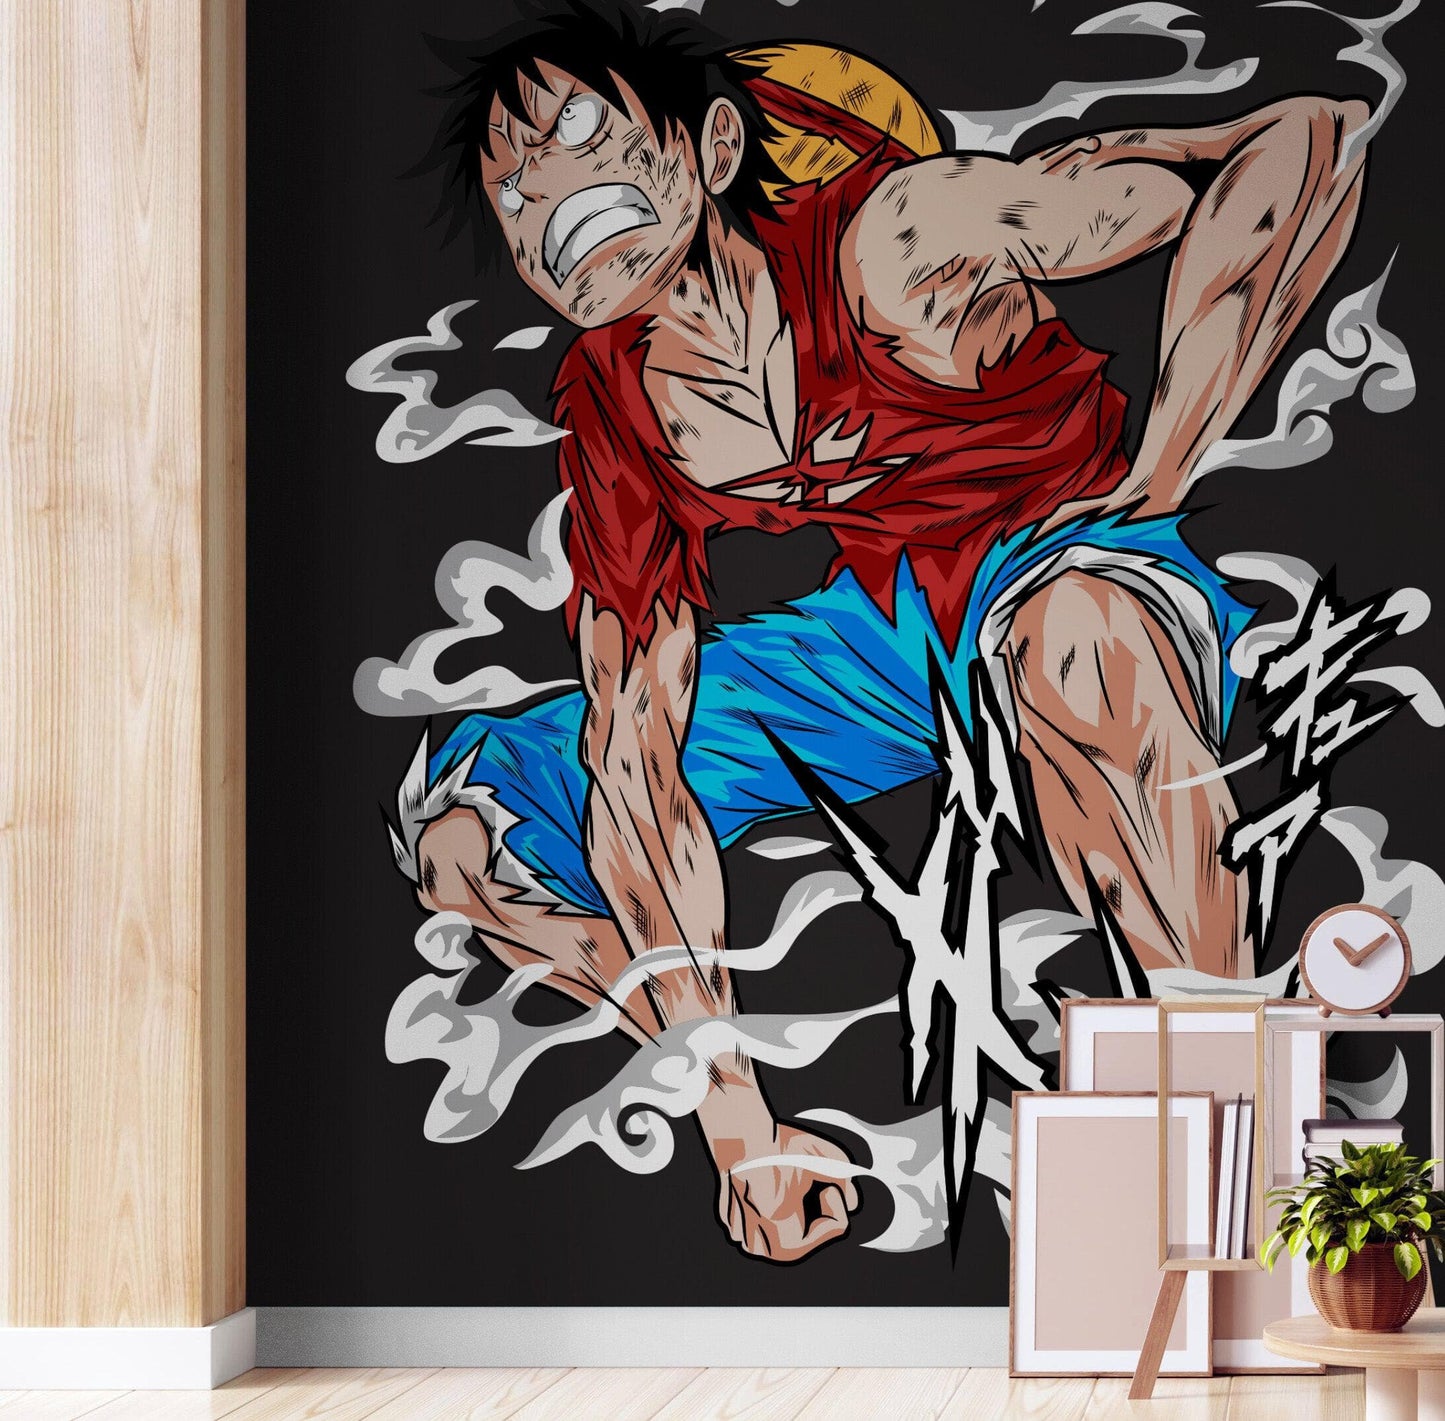 Straw Hat Pirate Anime Wall Mural Wallpaper. #A1004